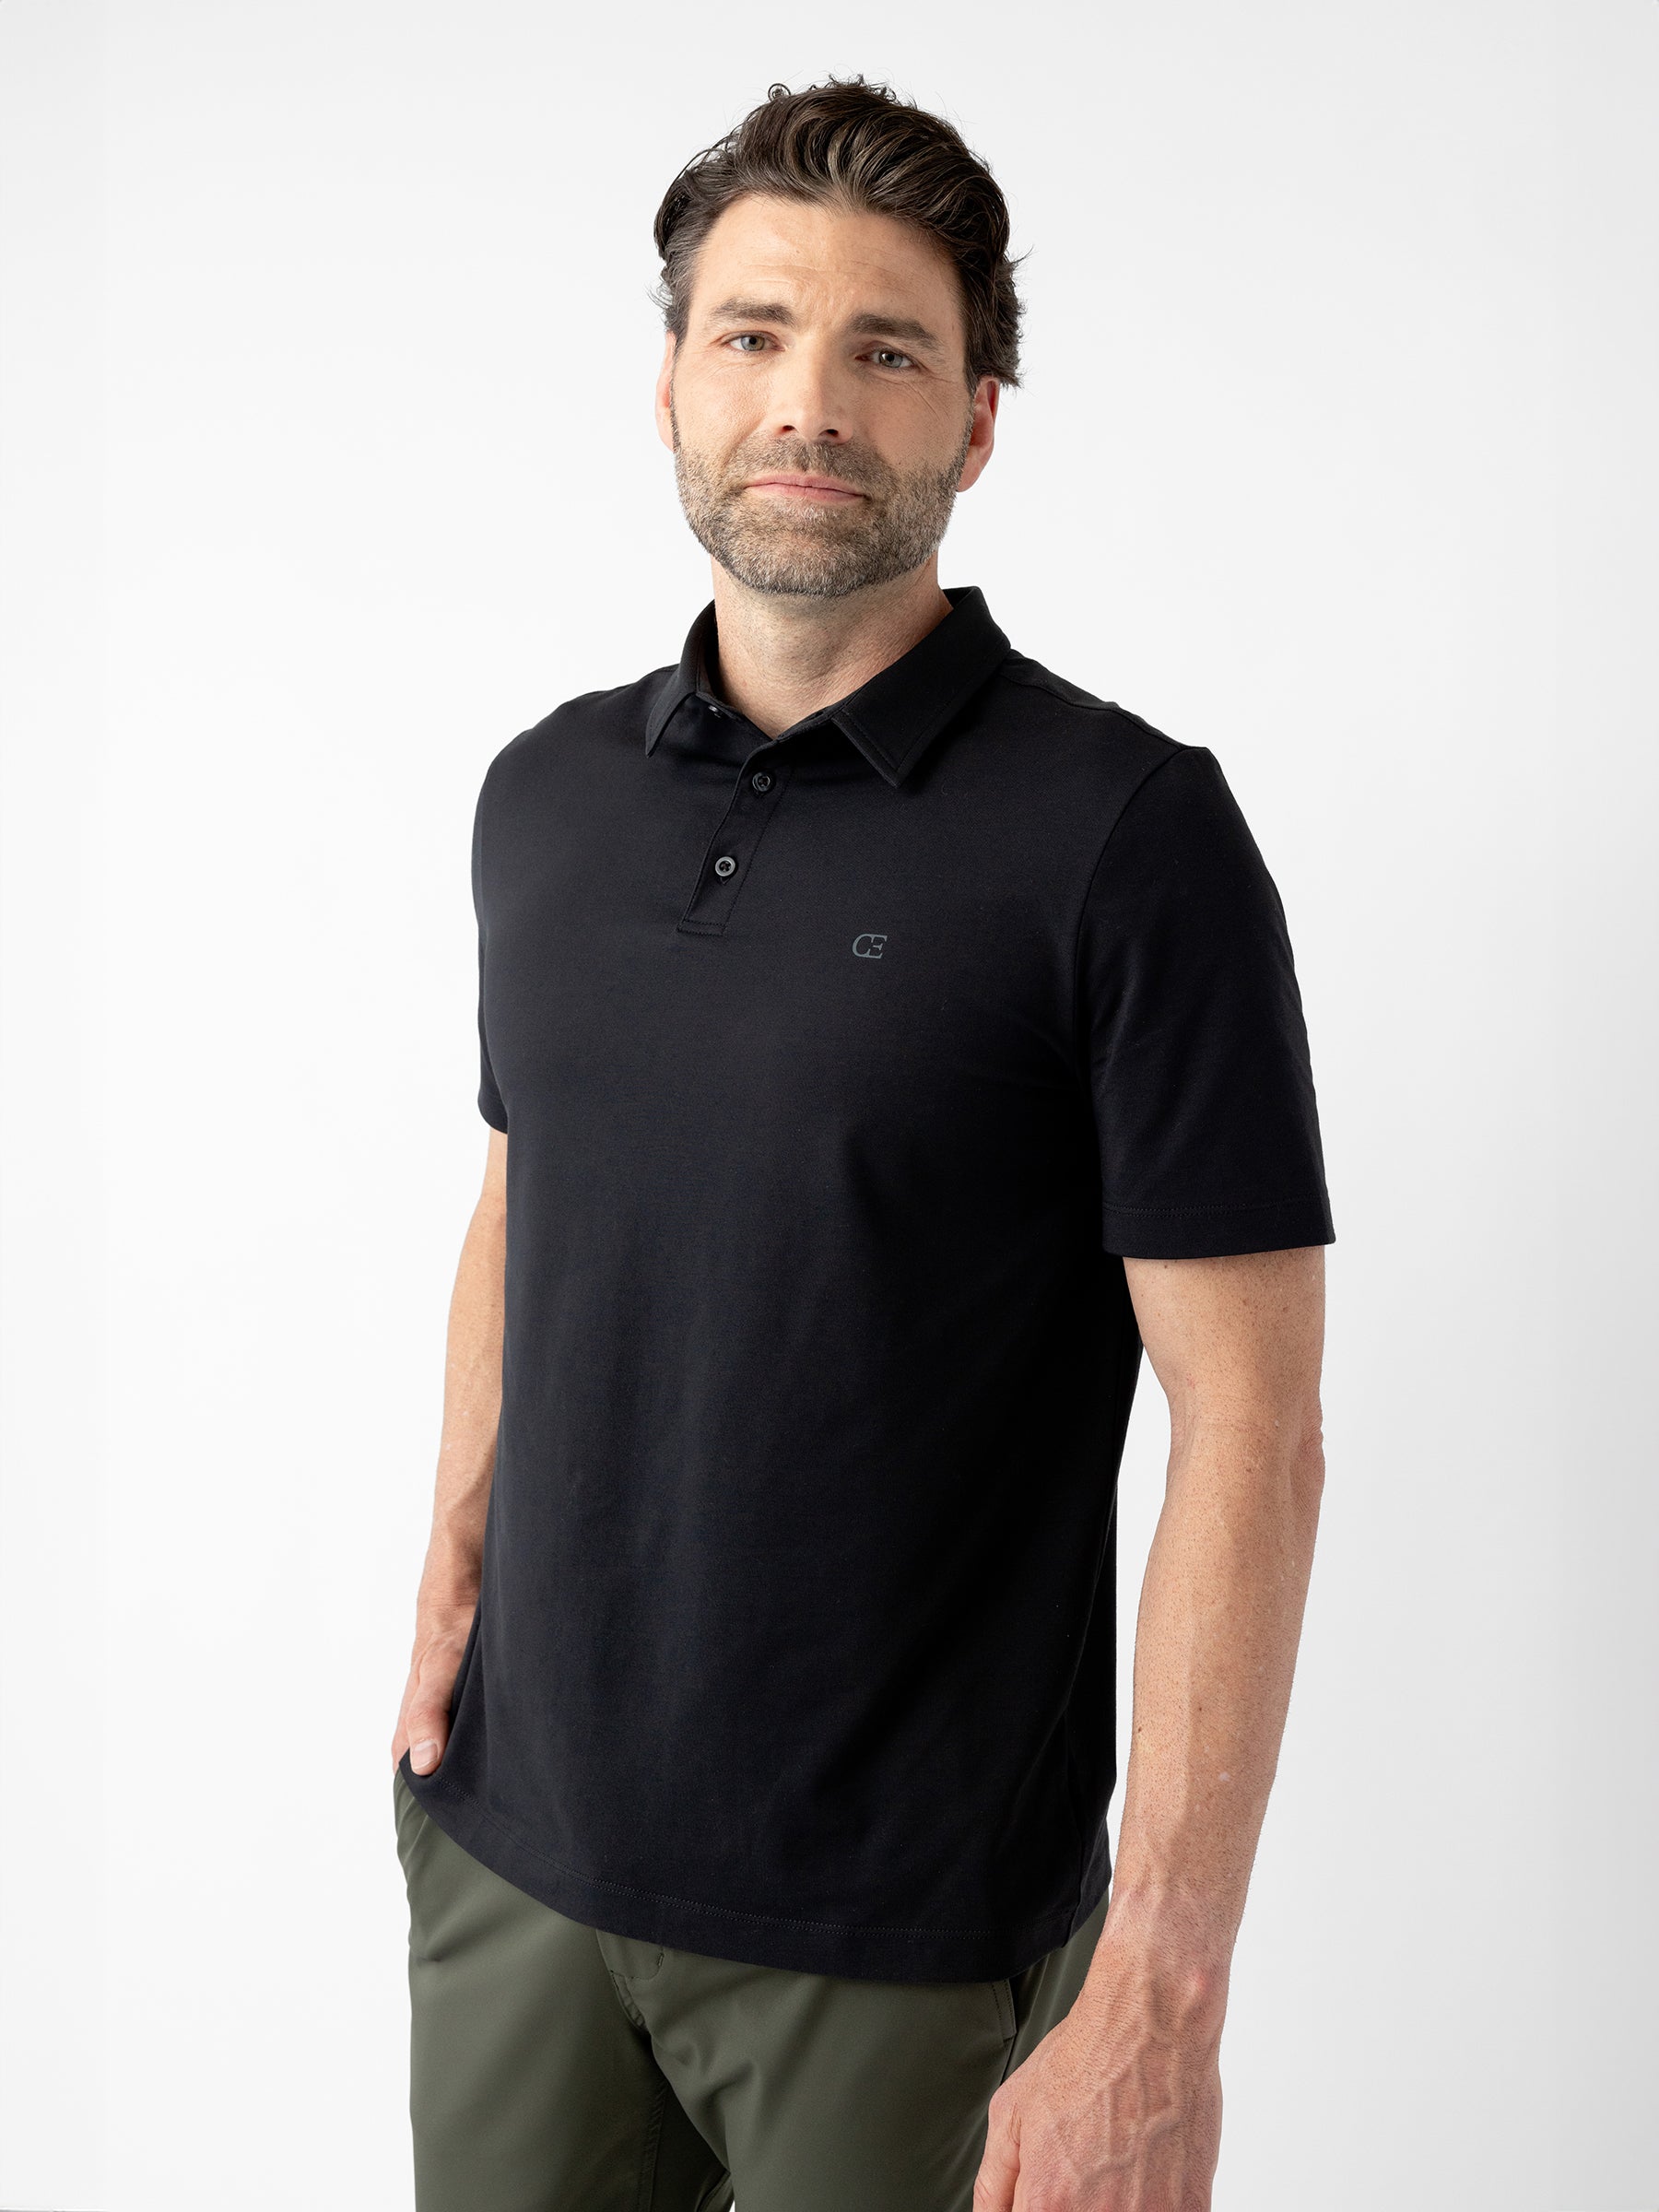 A man with short, dark hair and a beard wears a Men's Everyday Polo by Cozy Earth in black paired with dark green pants. He stands against a plain white background with his right hand in his pocket and a neutral expression on his face. |Color:Jet Black